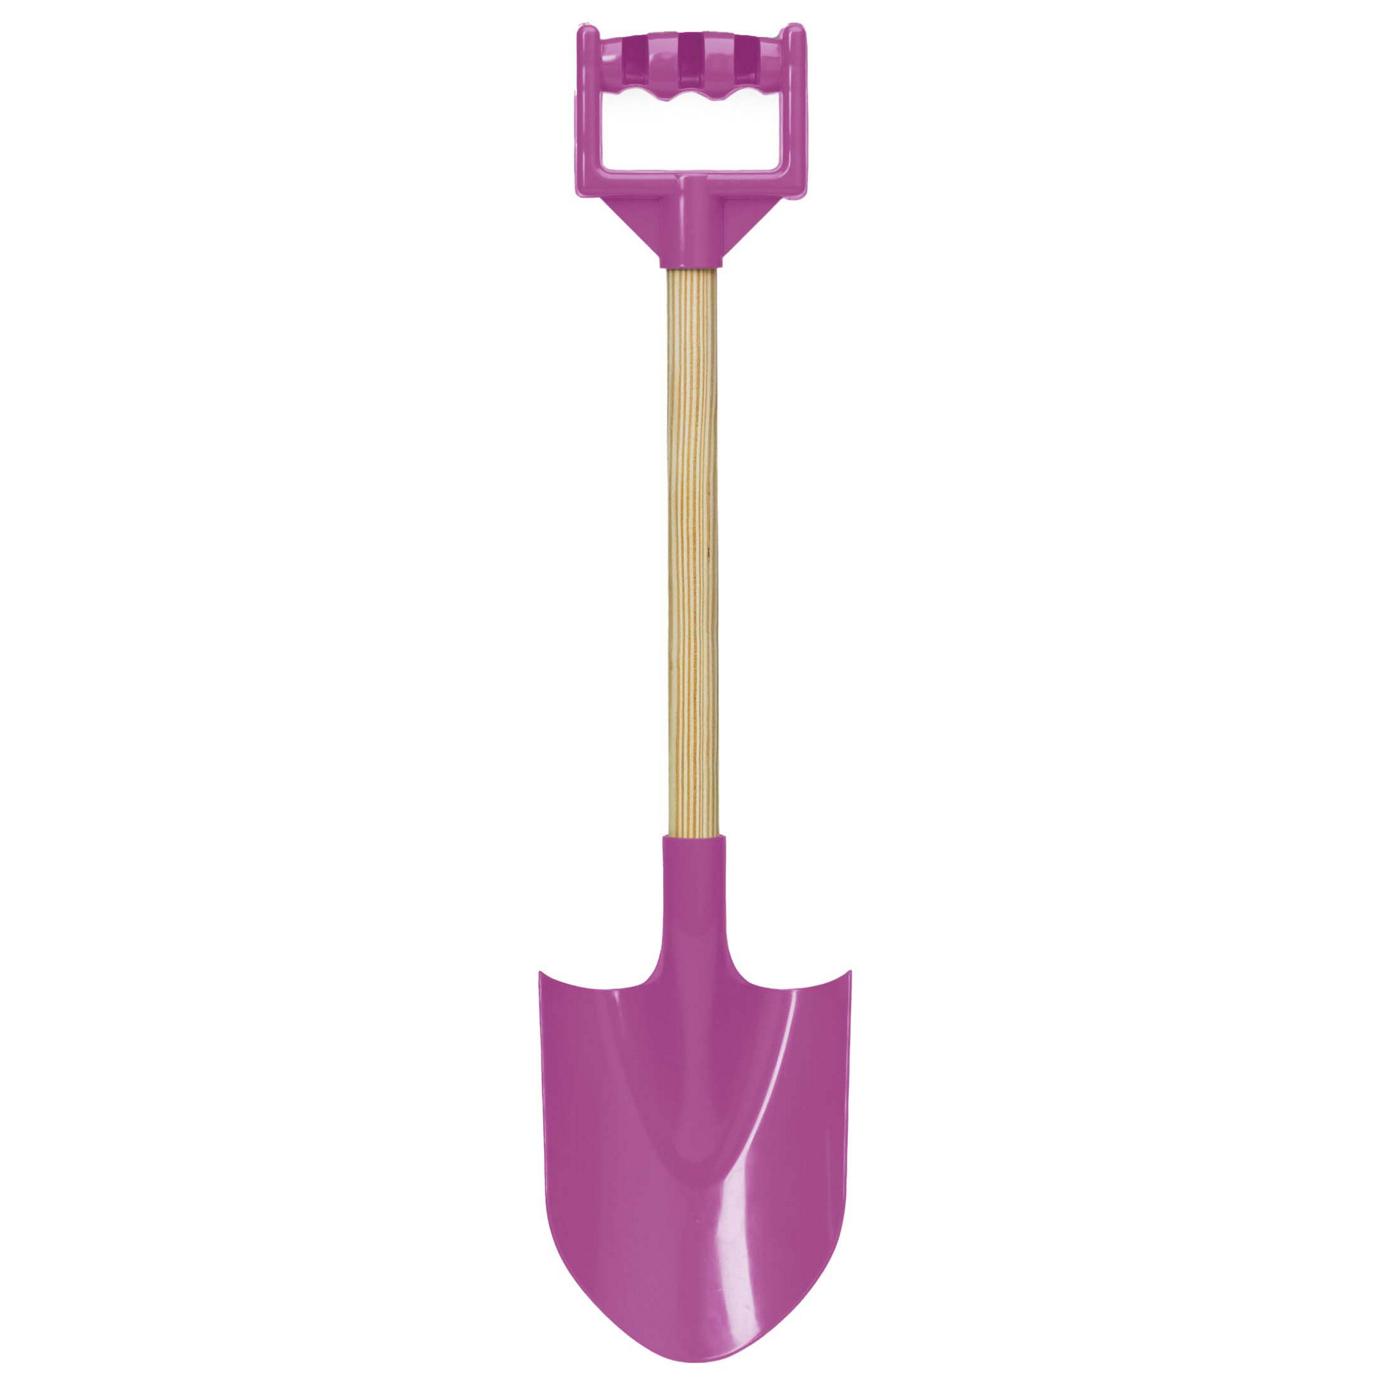 American Plastic Toys Wooden Shovel - Assorted; image 2 of 2